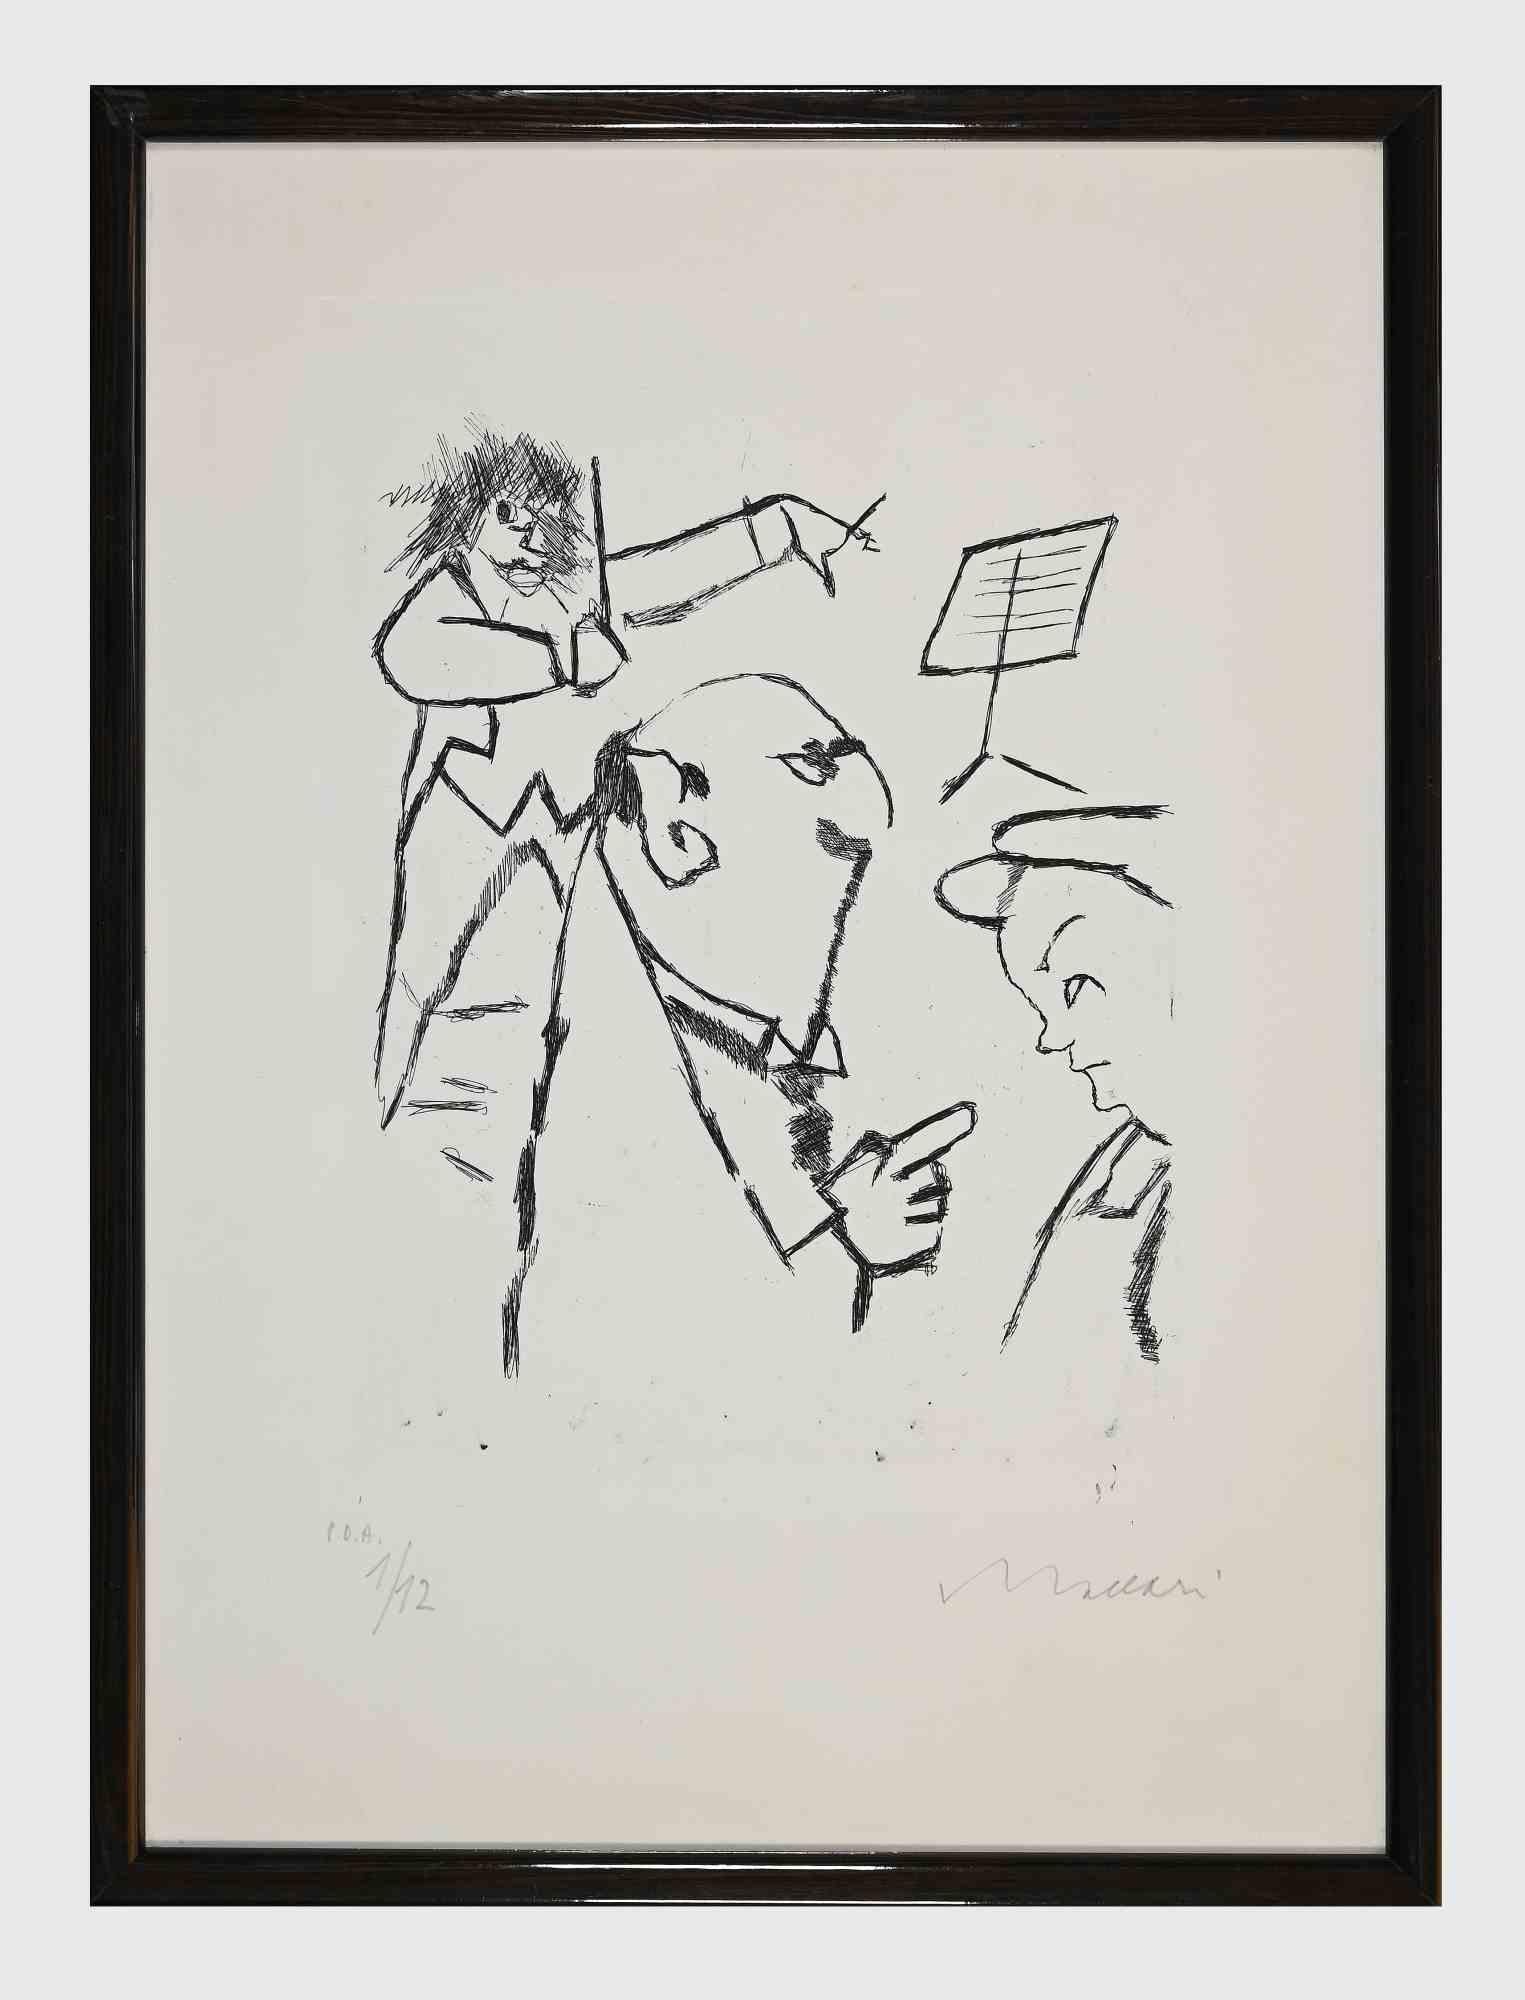 At the concert is an original modern artwork realized in 1970s by the Italian artist  Mino Maccari  (Siena, 1898 - Rome, 1989).

Original black and white etching and drypoint.

Hand-signed  by the artist on the lower corner:  Mino Maccari.

Numbered